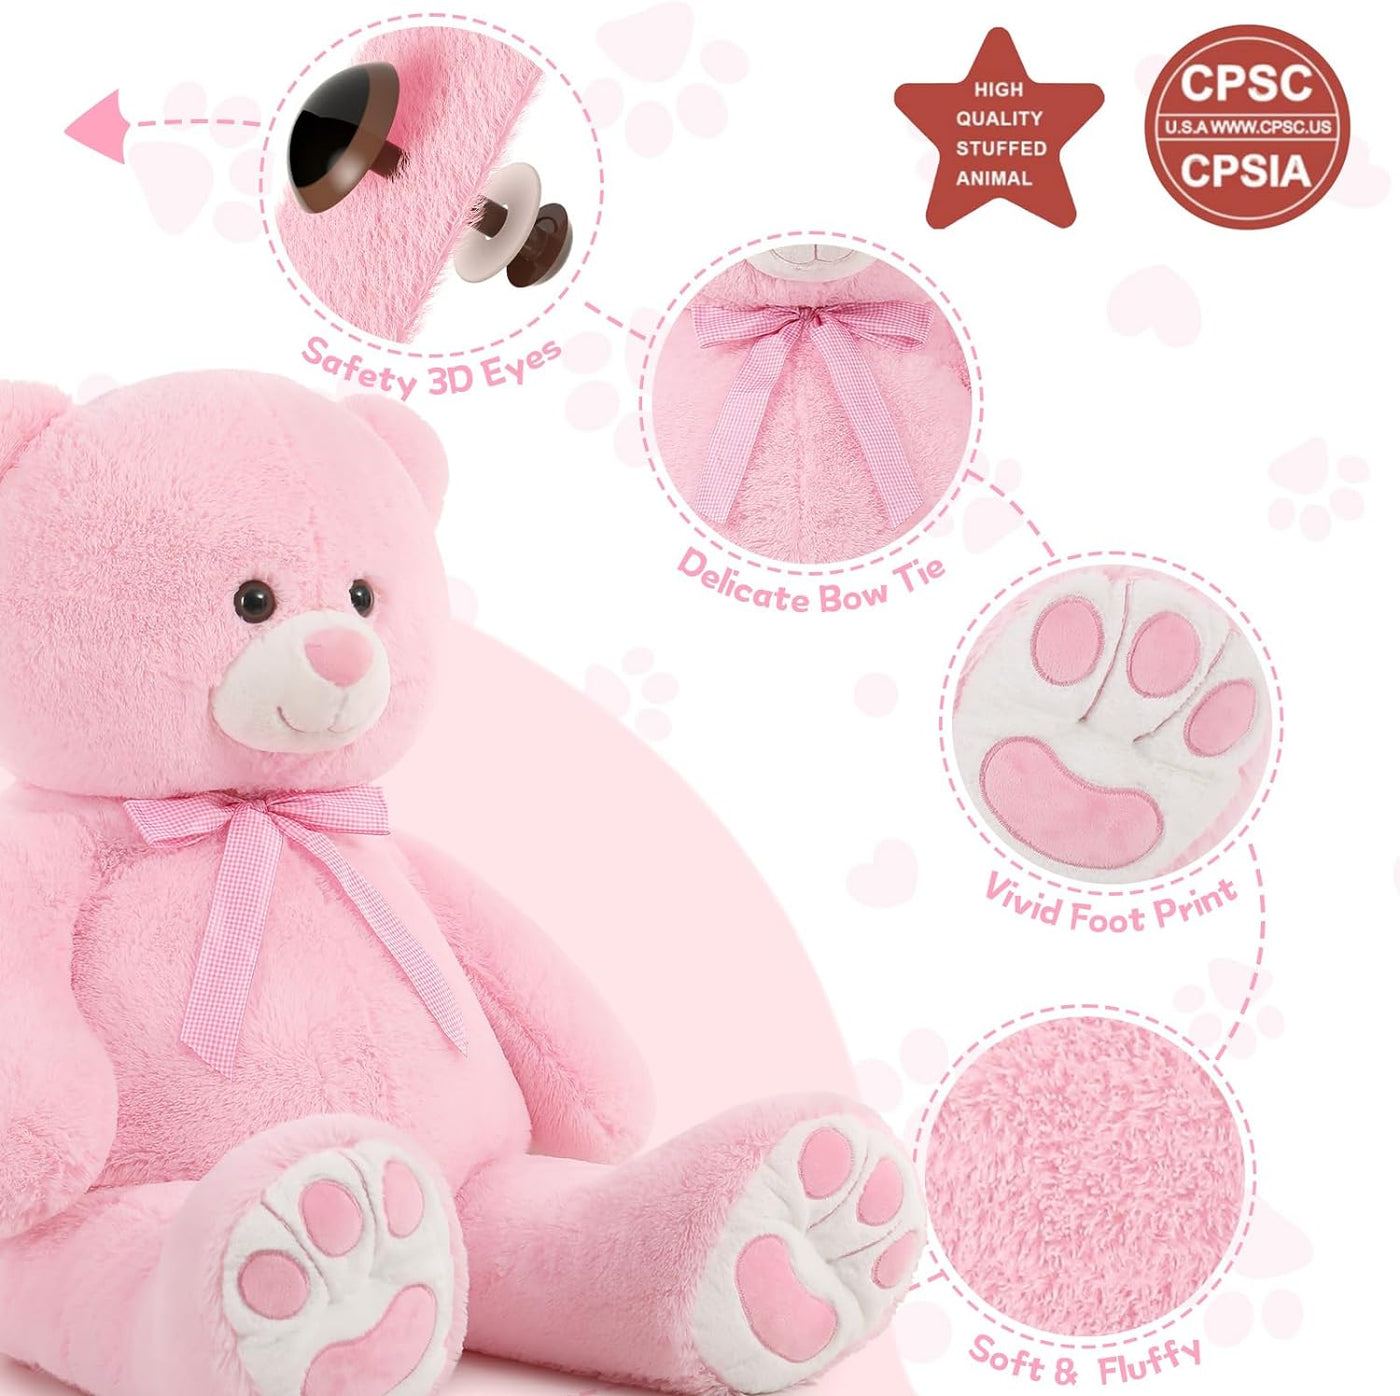 Giant Teddy Bear Stuffed Toy, Pink, 43.3 Inches